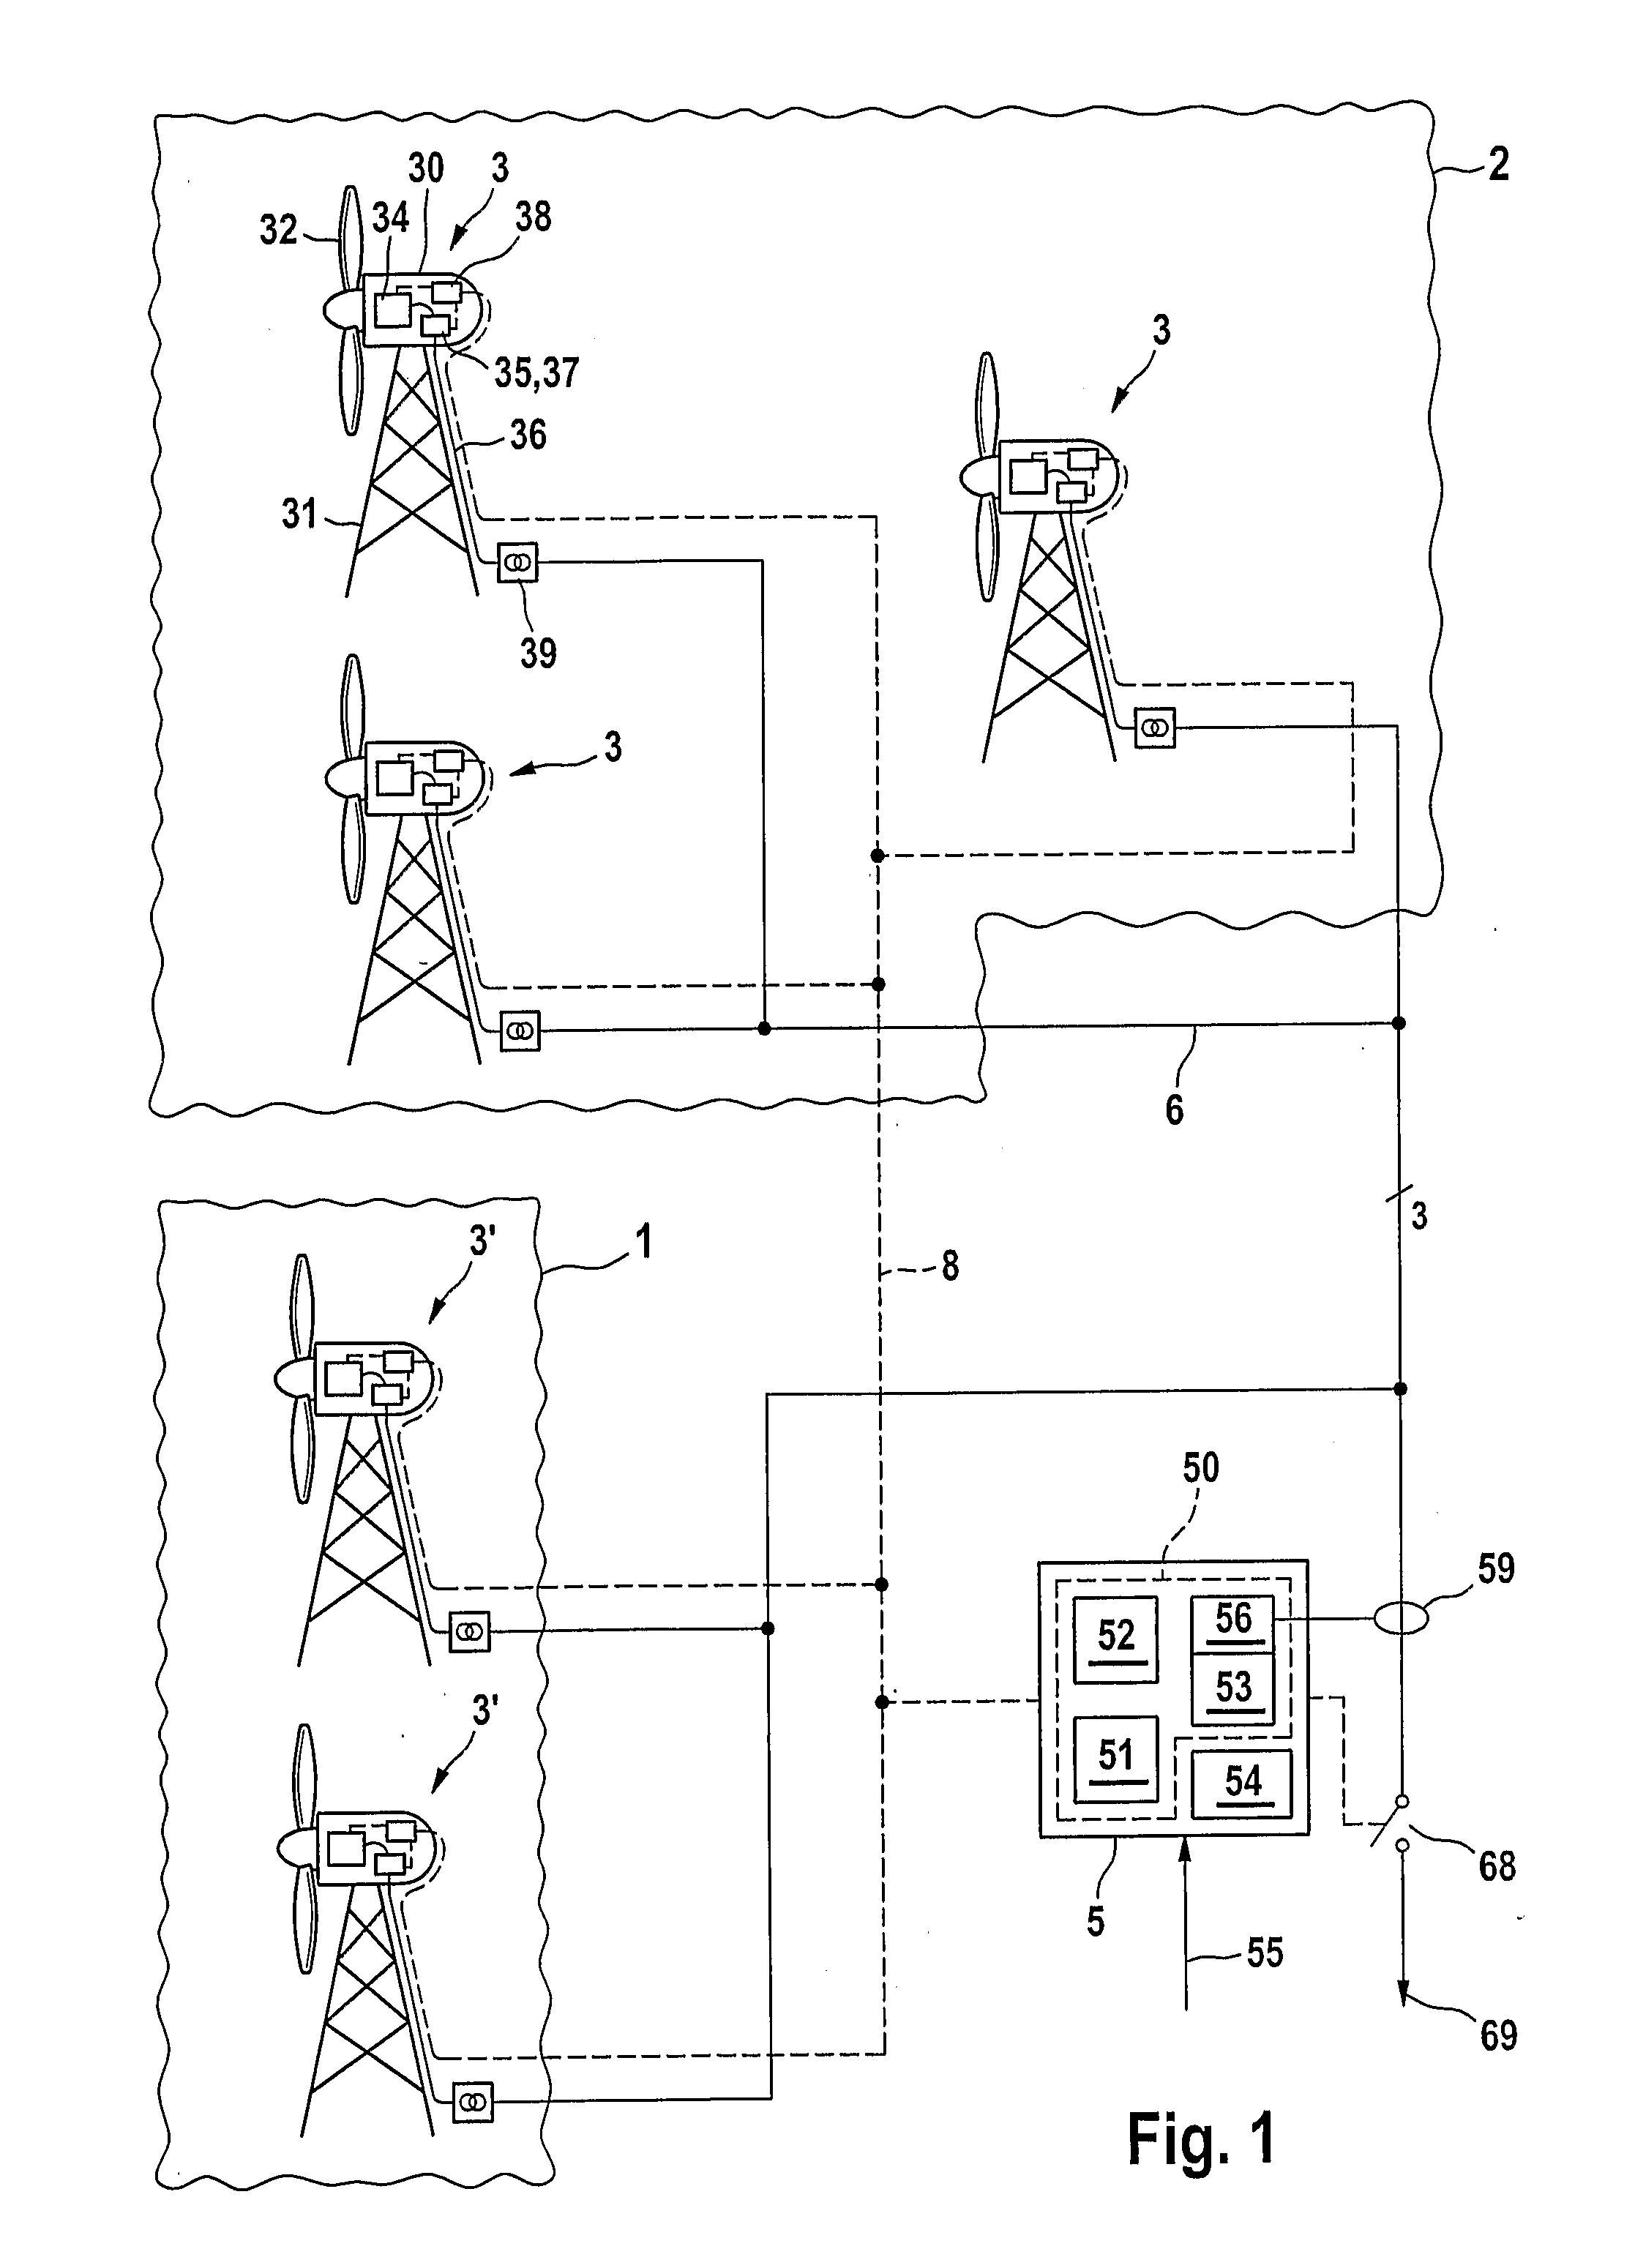 Power Control of a Wind Farm and Method Thereof